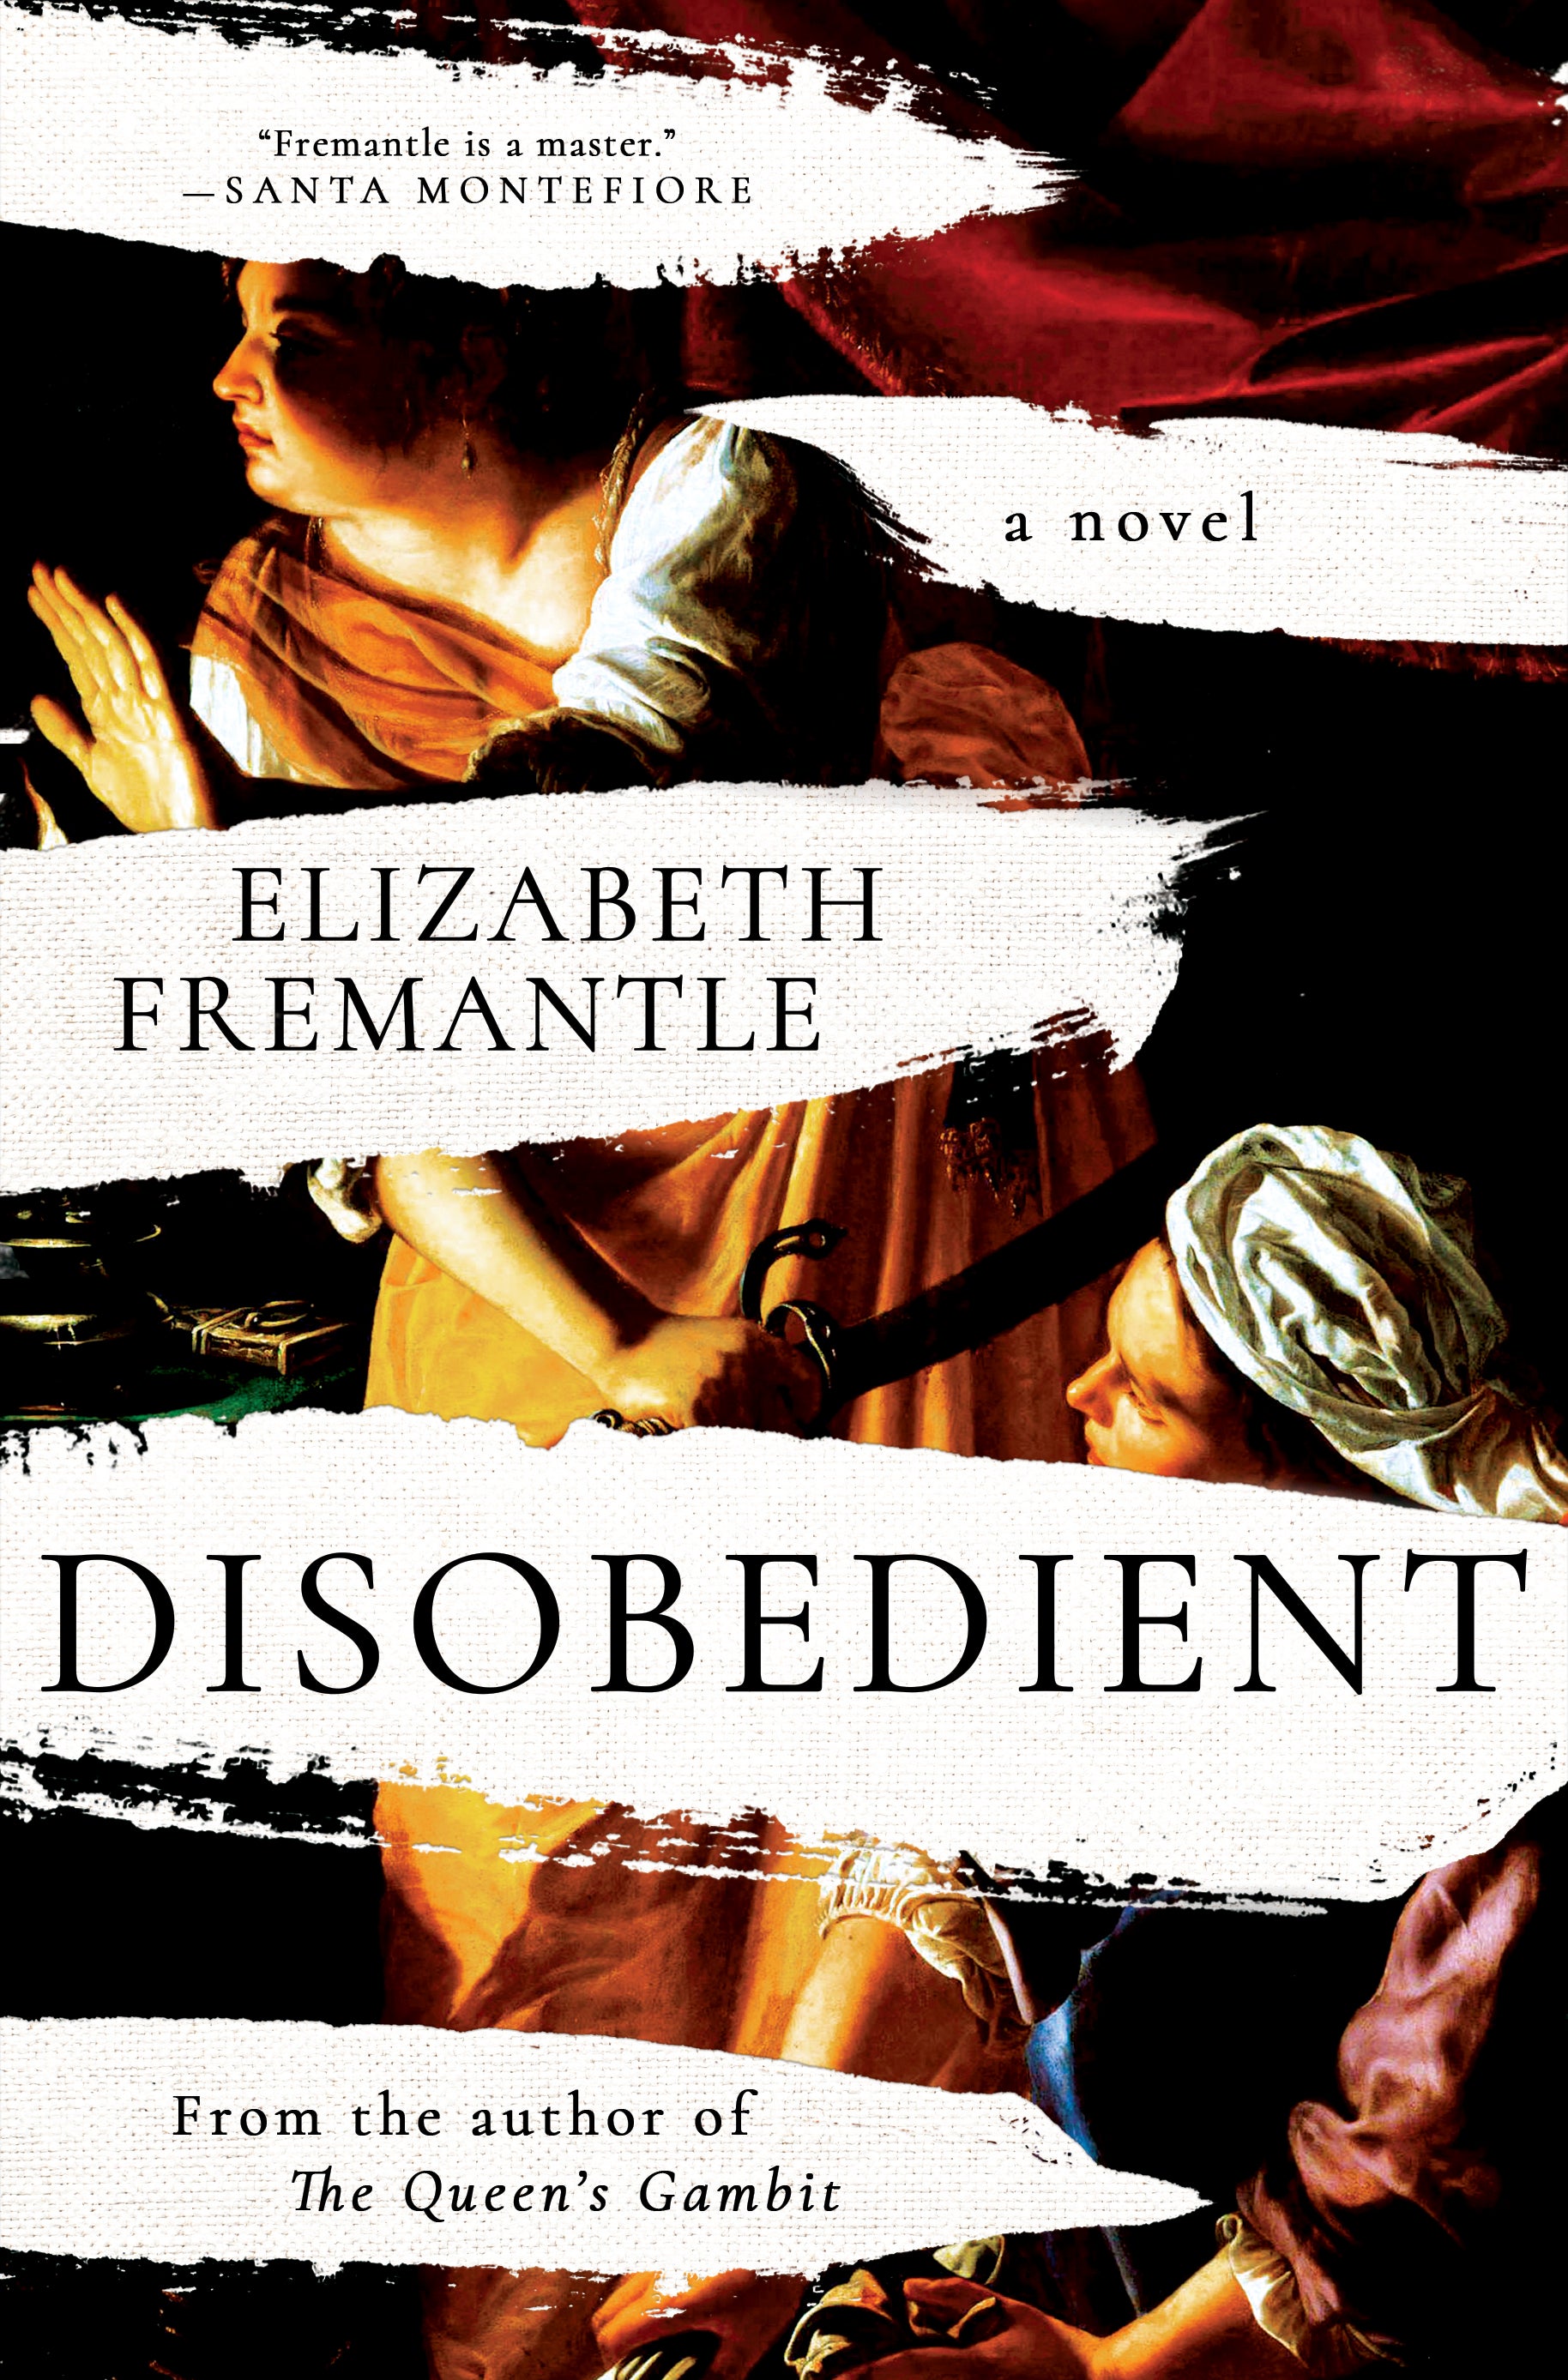 Book Review - Disobedient